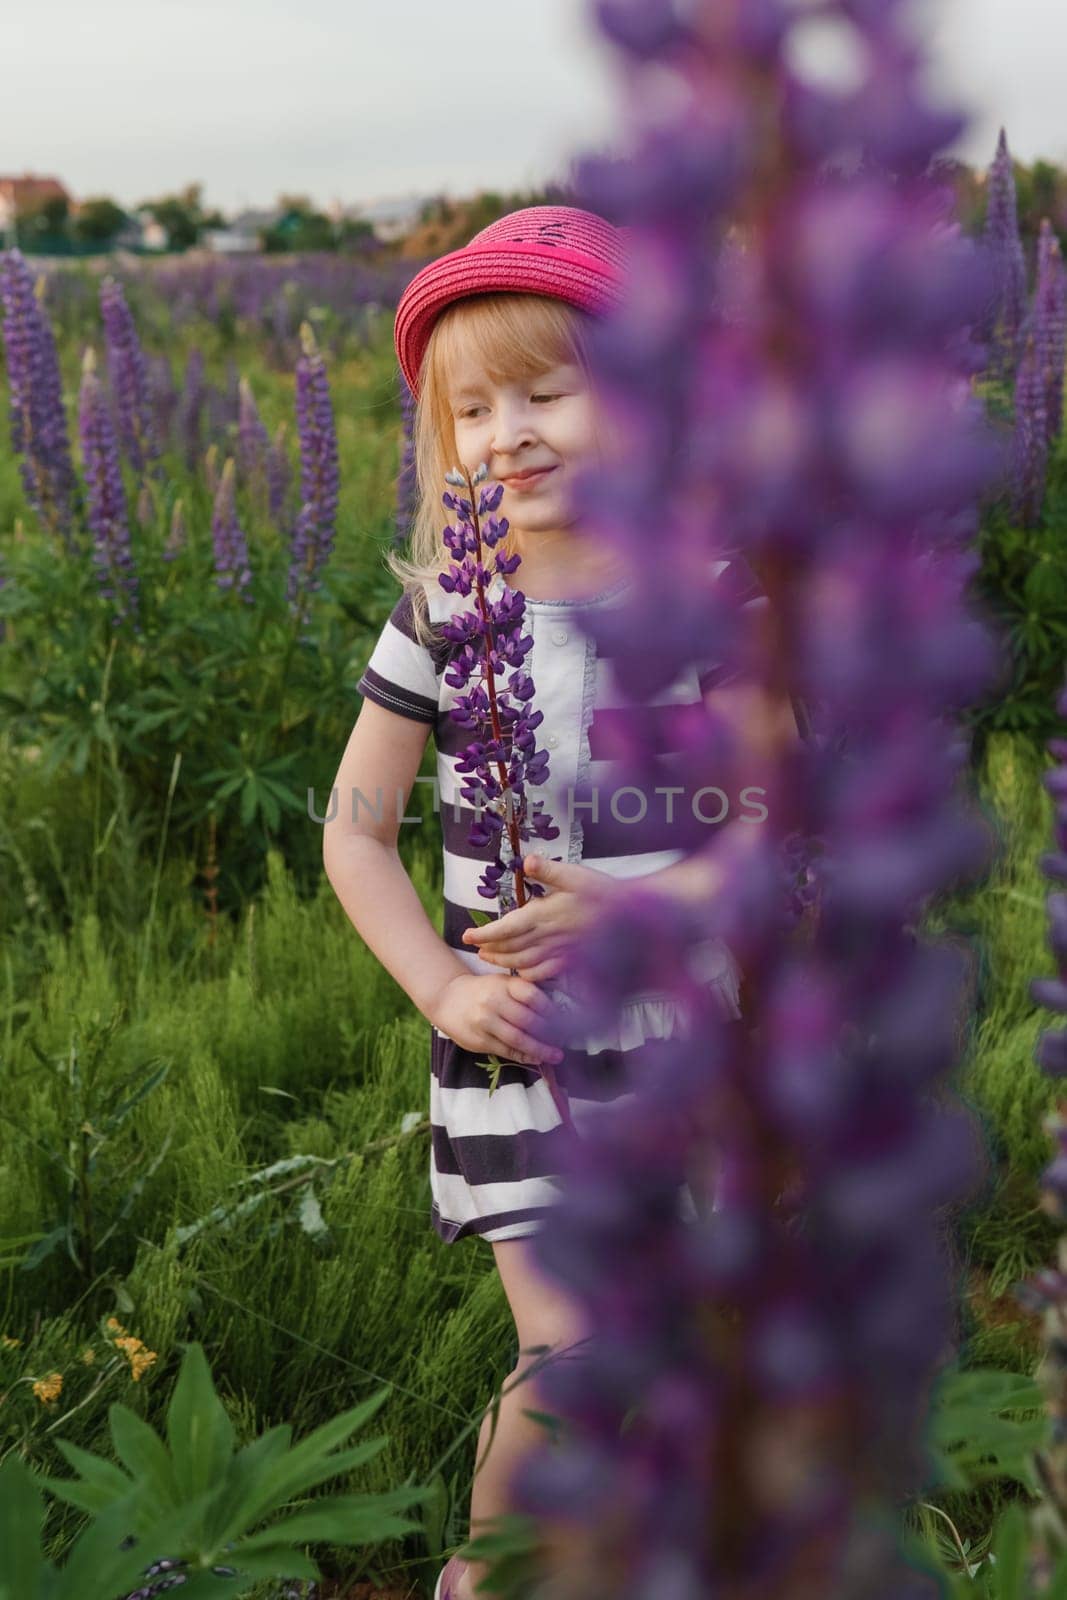 A blonde girl in a field with purple flowers. A little girl in a pink hat is picking flowers in a field. A field with lupines by Annu1tochka